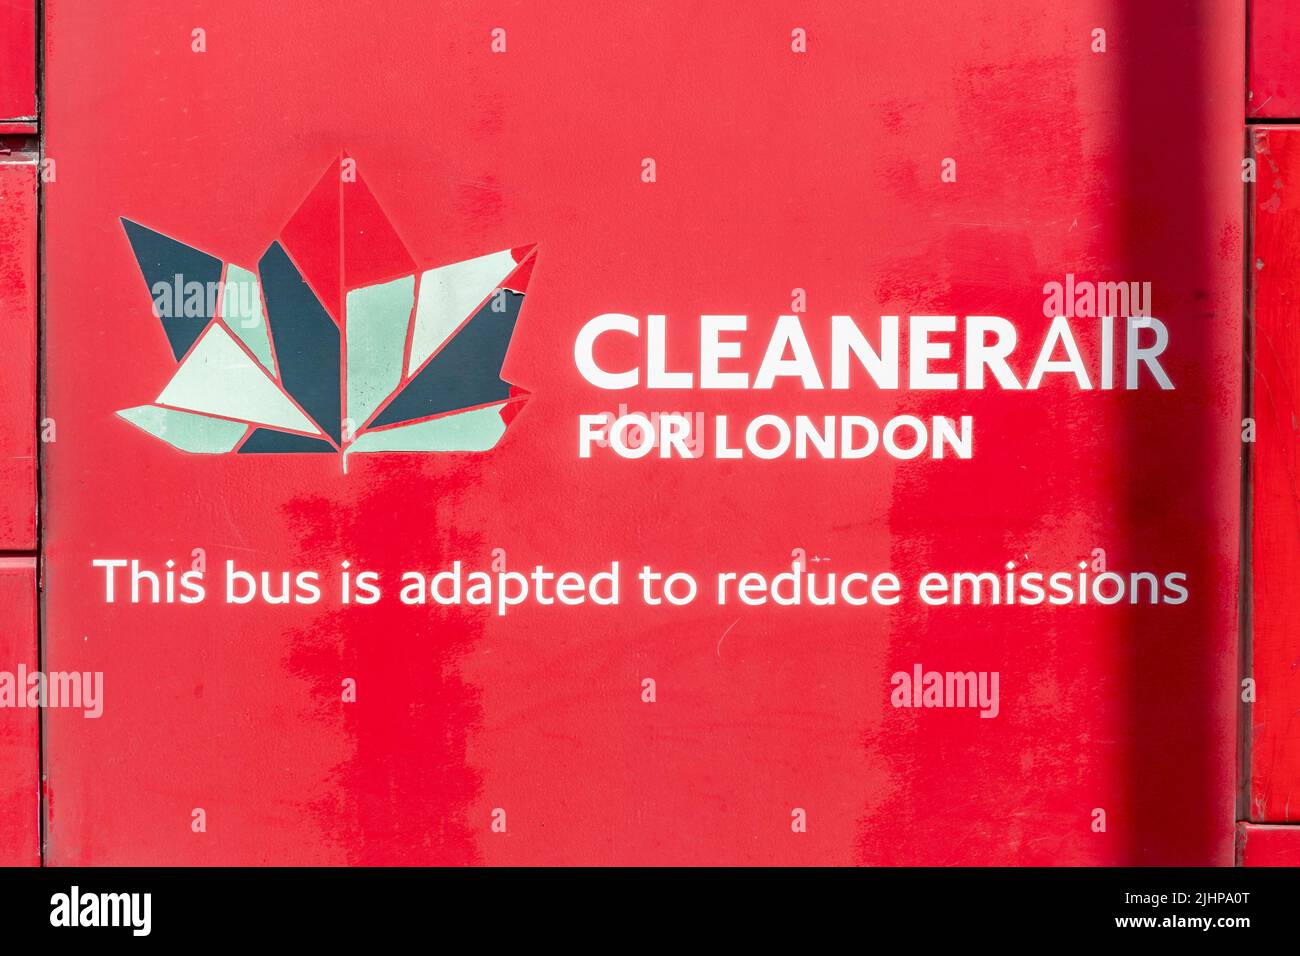 Red bus with Cleaner air for London slogan on side, this bus is adapted to reduce emissions. Stock Photo